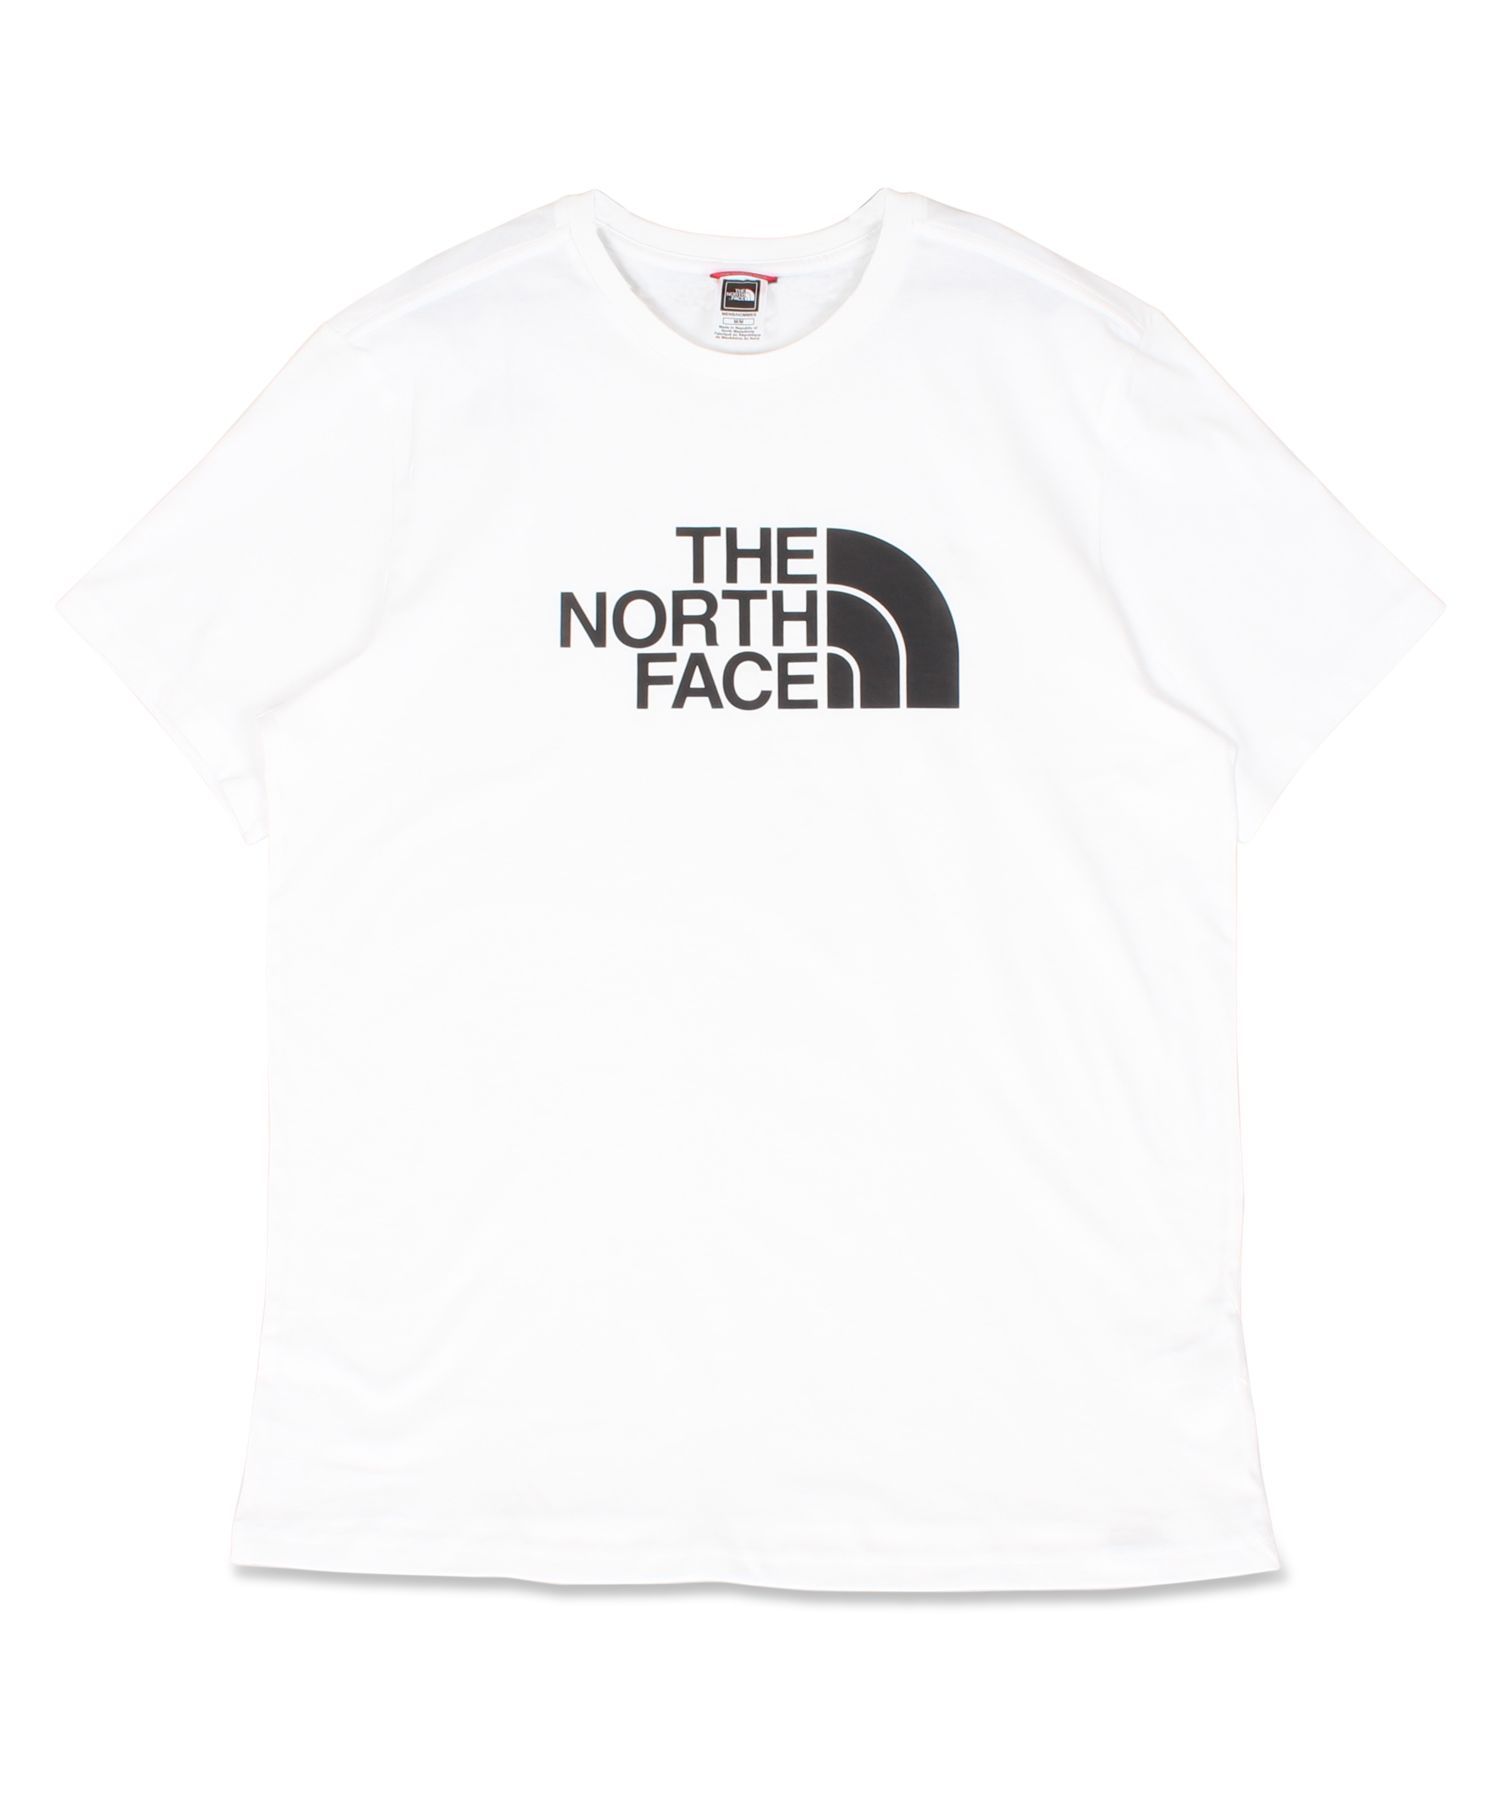 THE NORTH FACE  半袖　セット　Tシャツ　大人　子供